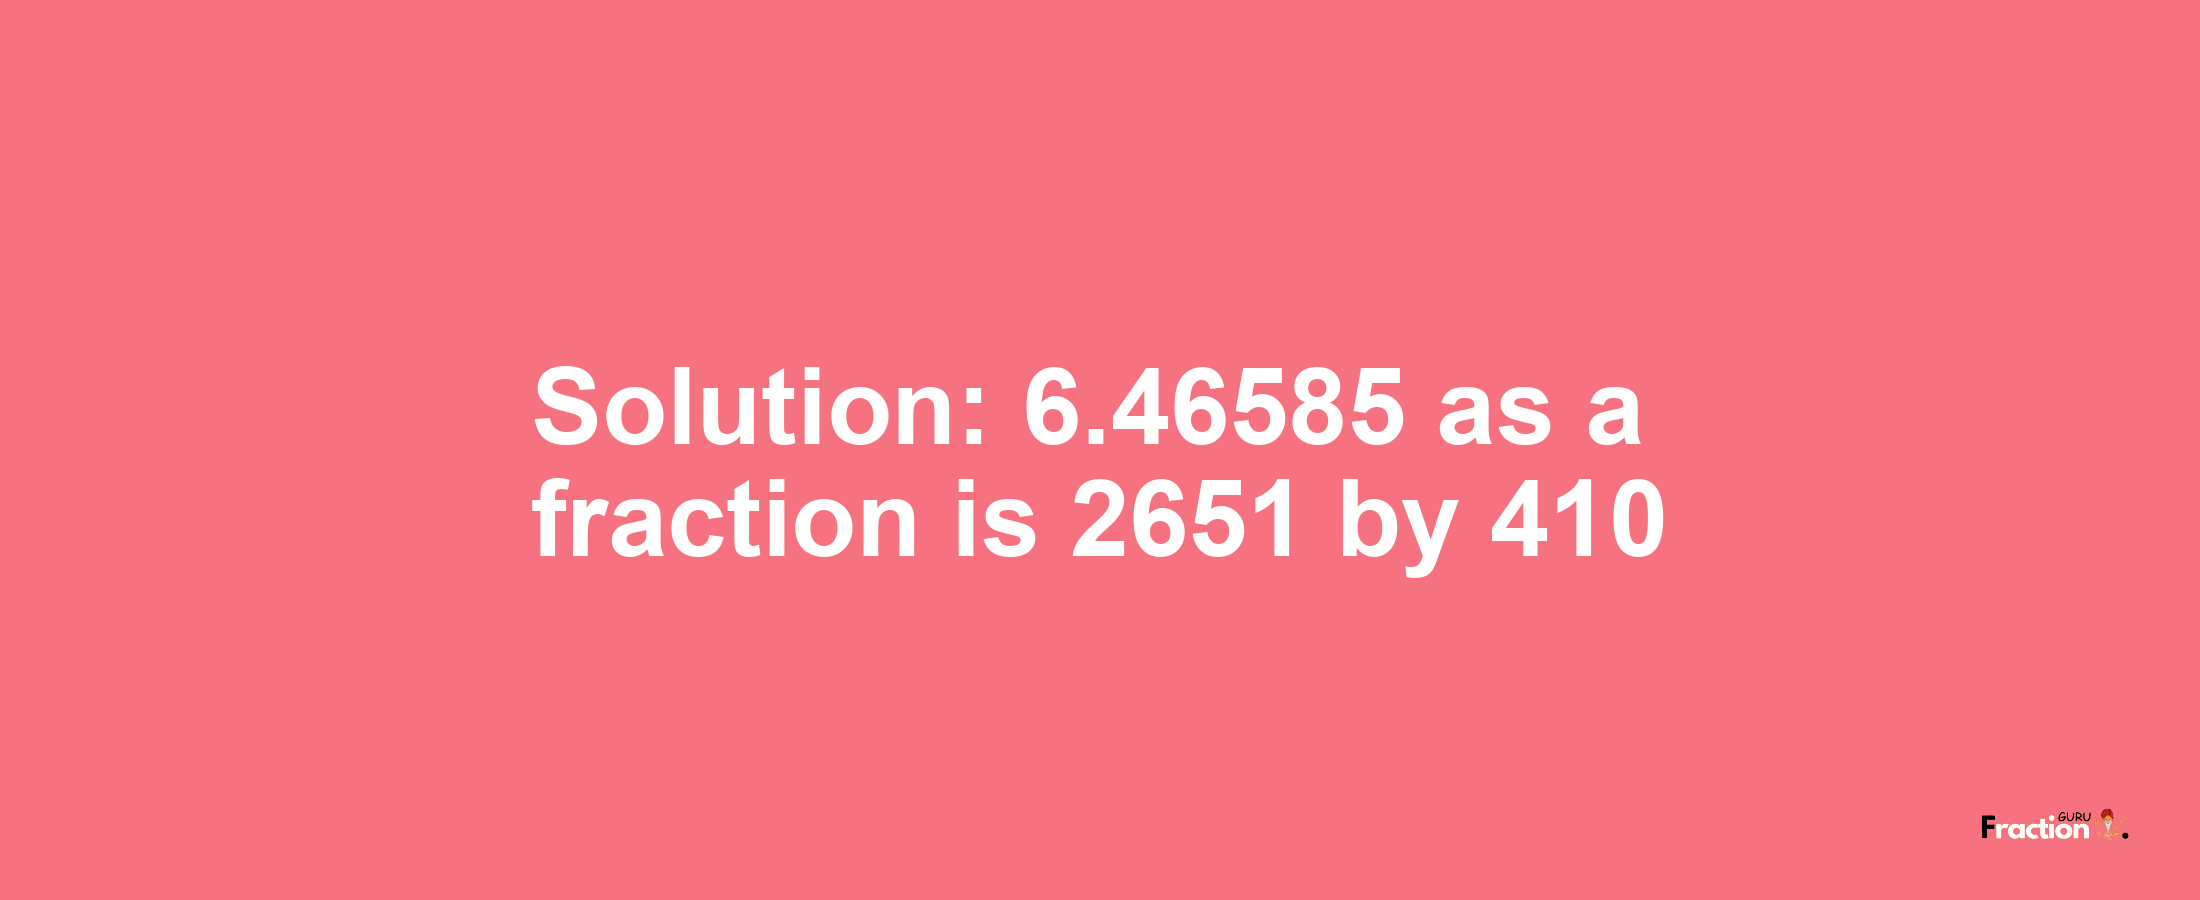 Solution:6.46585 as a fraction is 2651/410